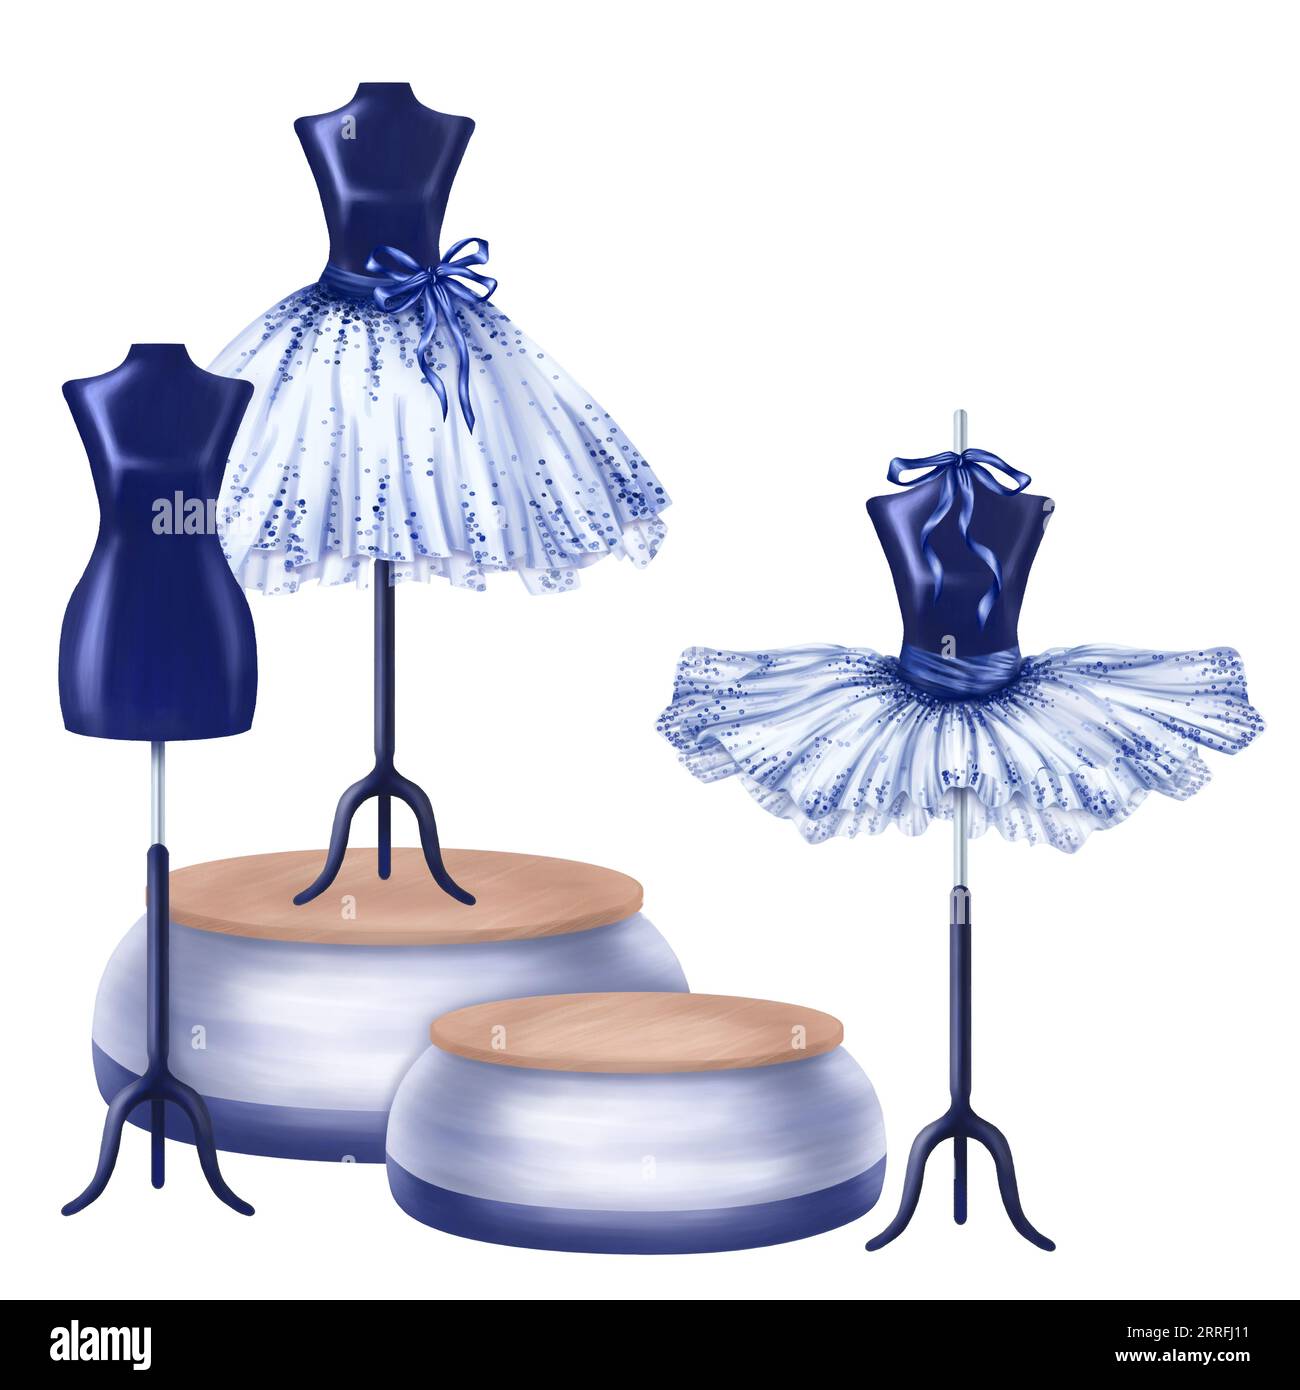 Blue ballet dance tutus, stage costumes. A skirt worn on a mannequin. A ...